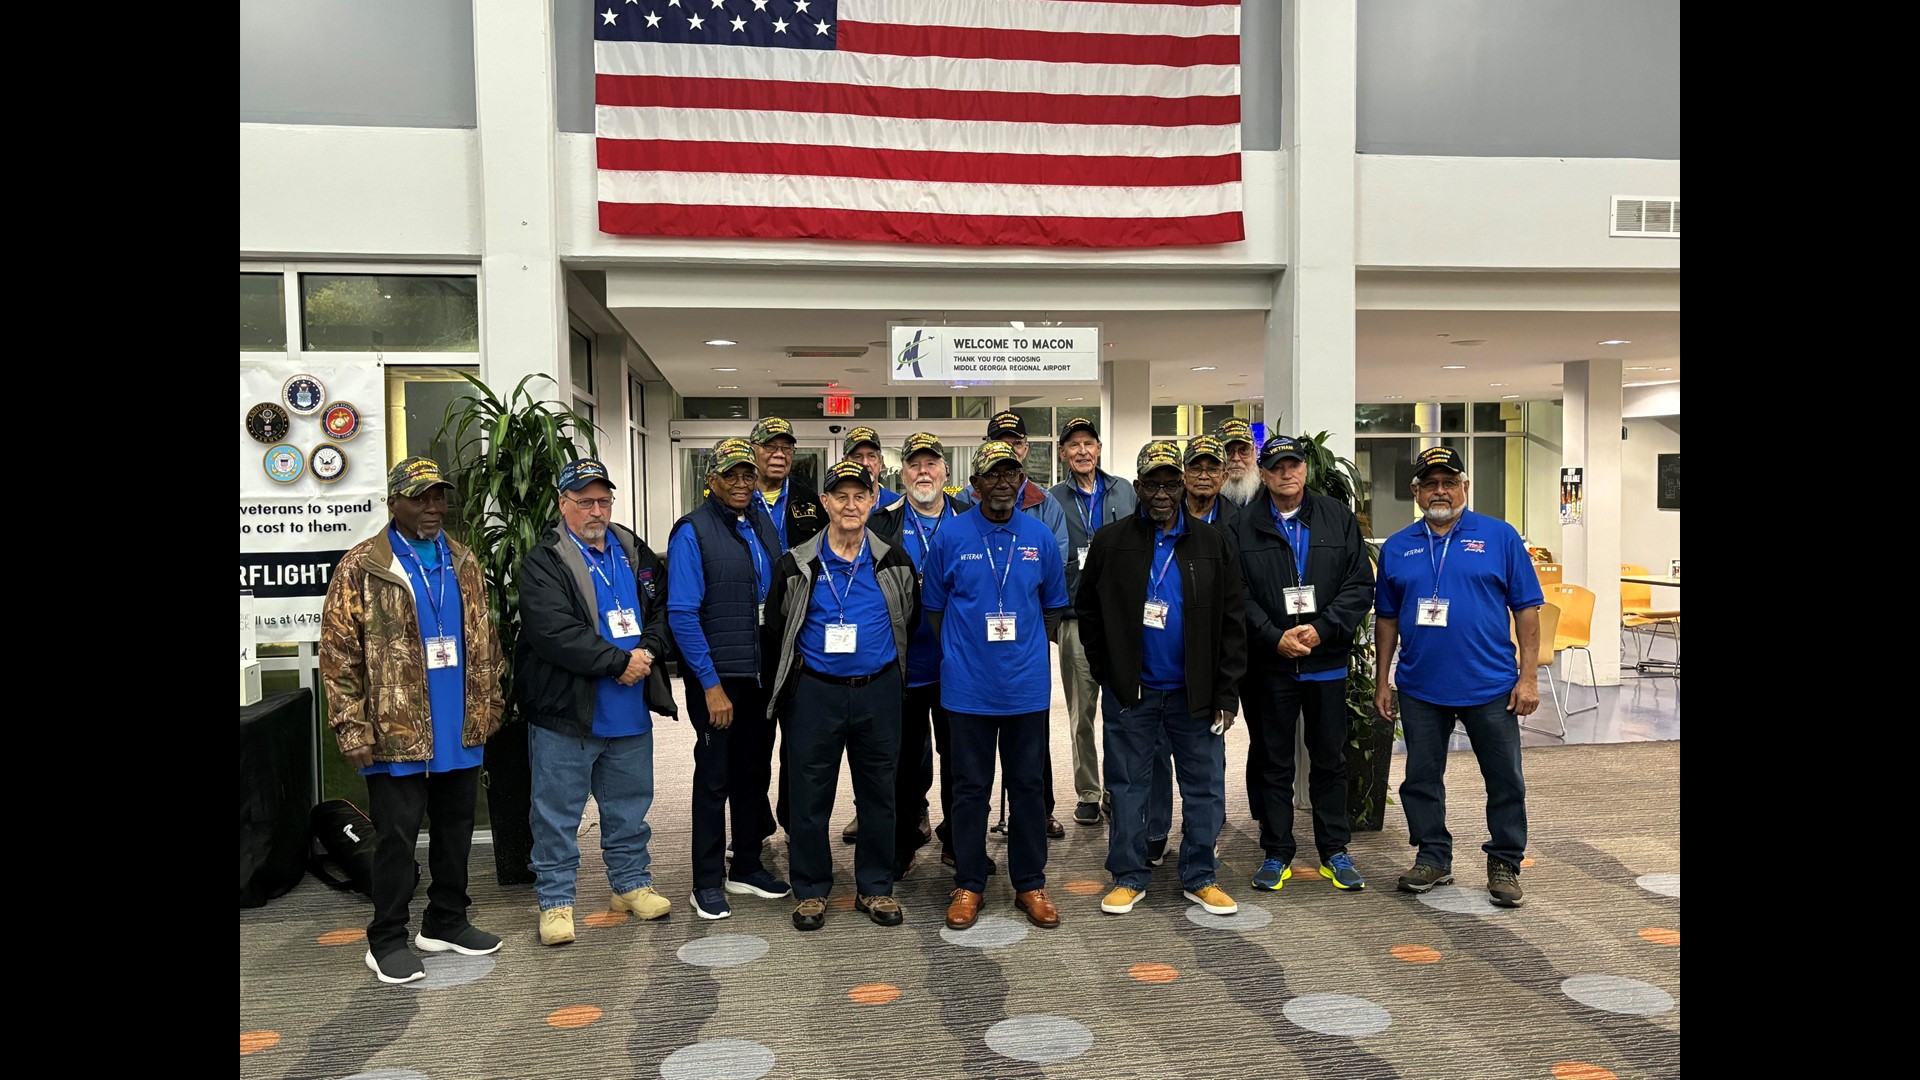 Since it began in 2018, Middle Georgia Honor Flight has taken over 200 veterans to see the war memorials, completely free of charge.